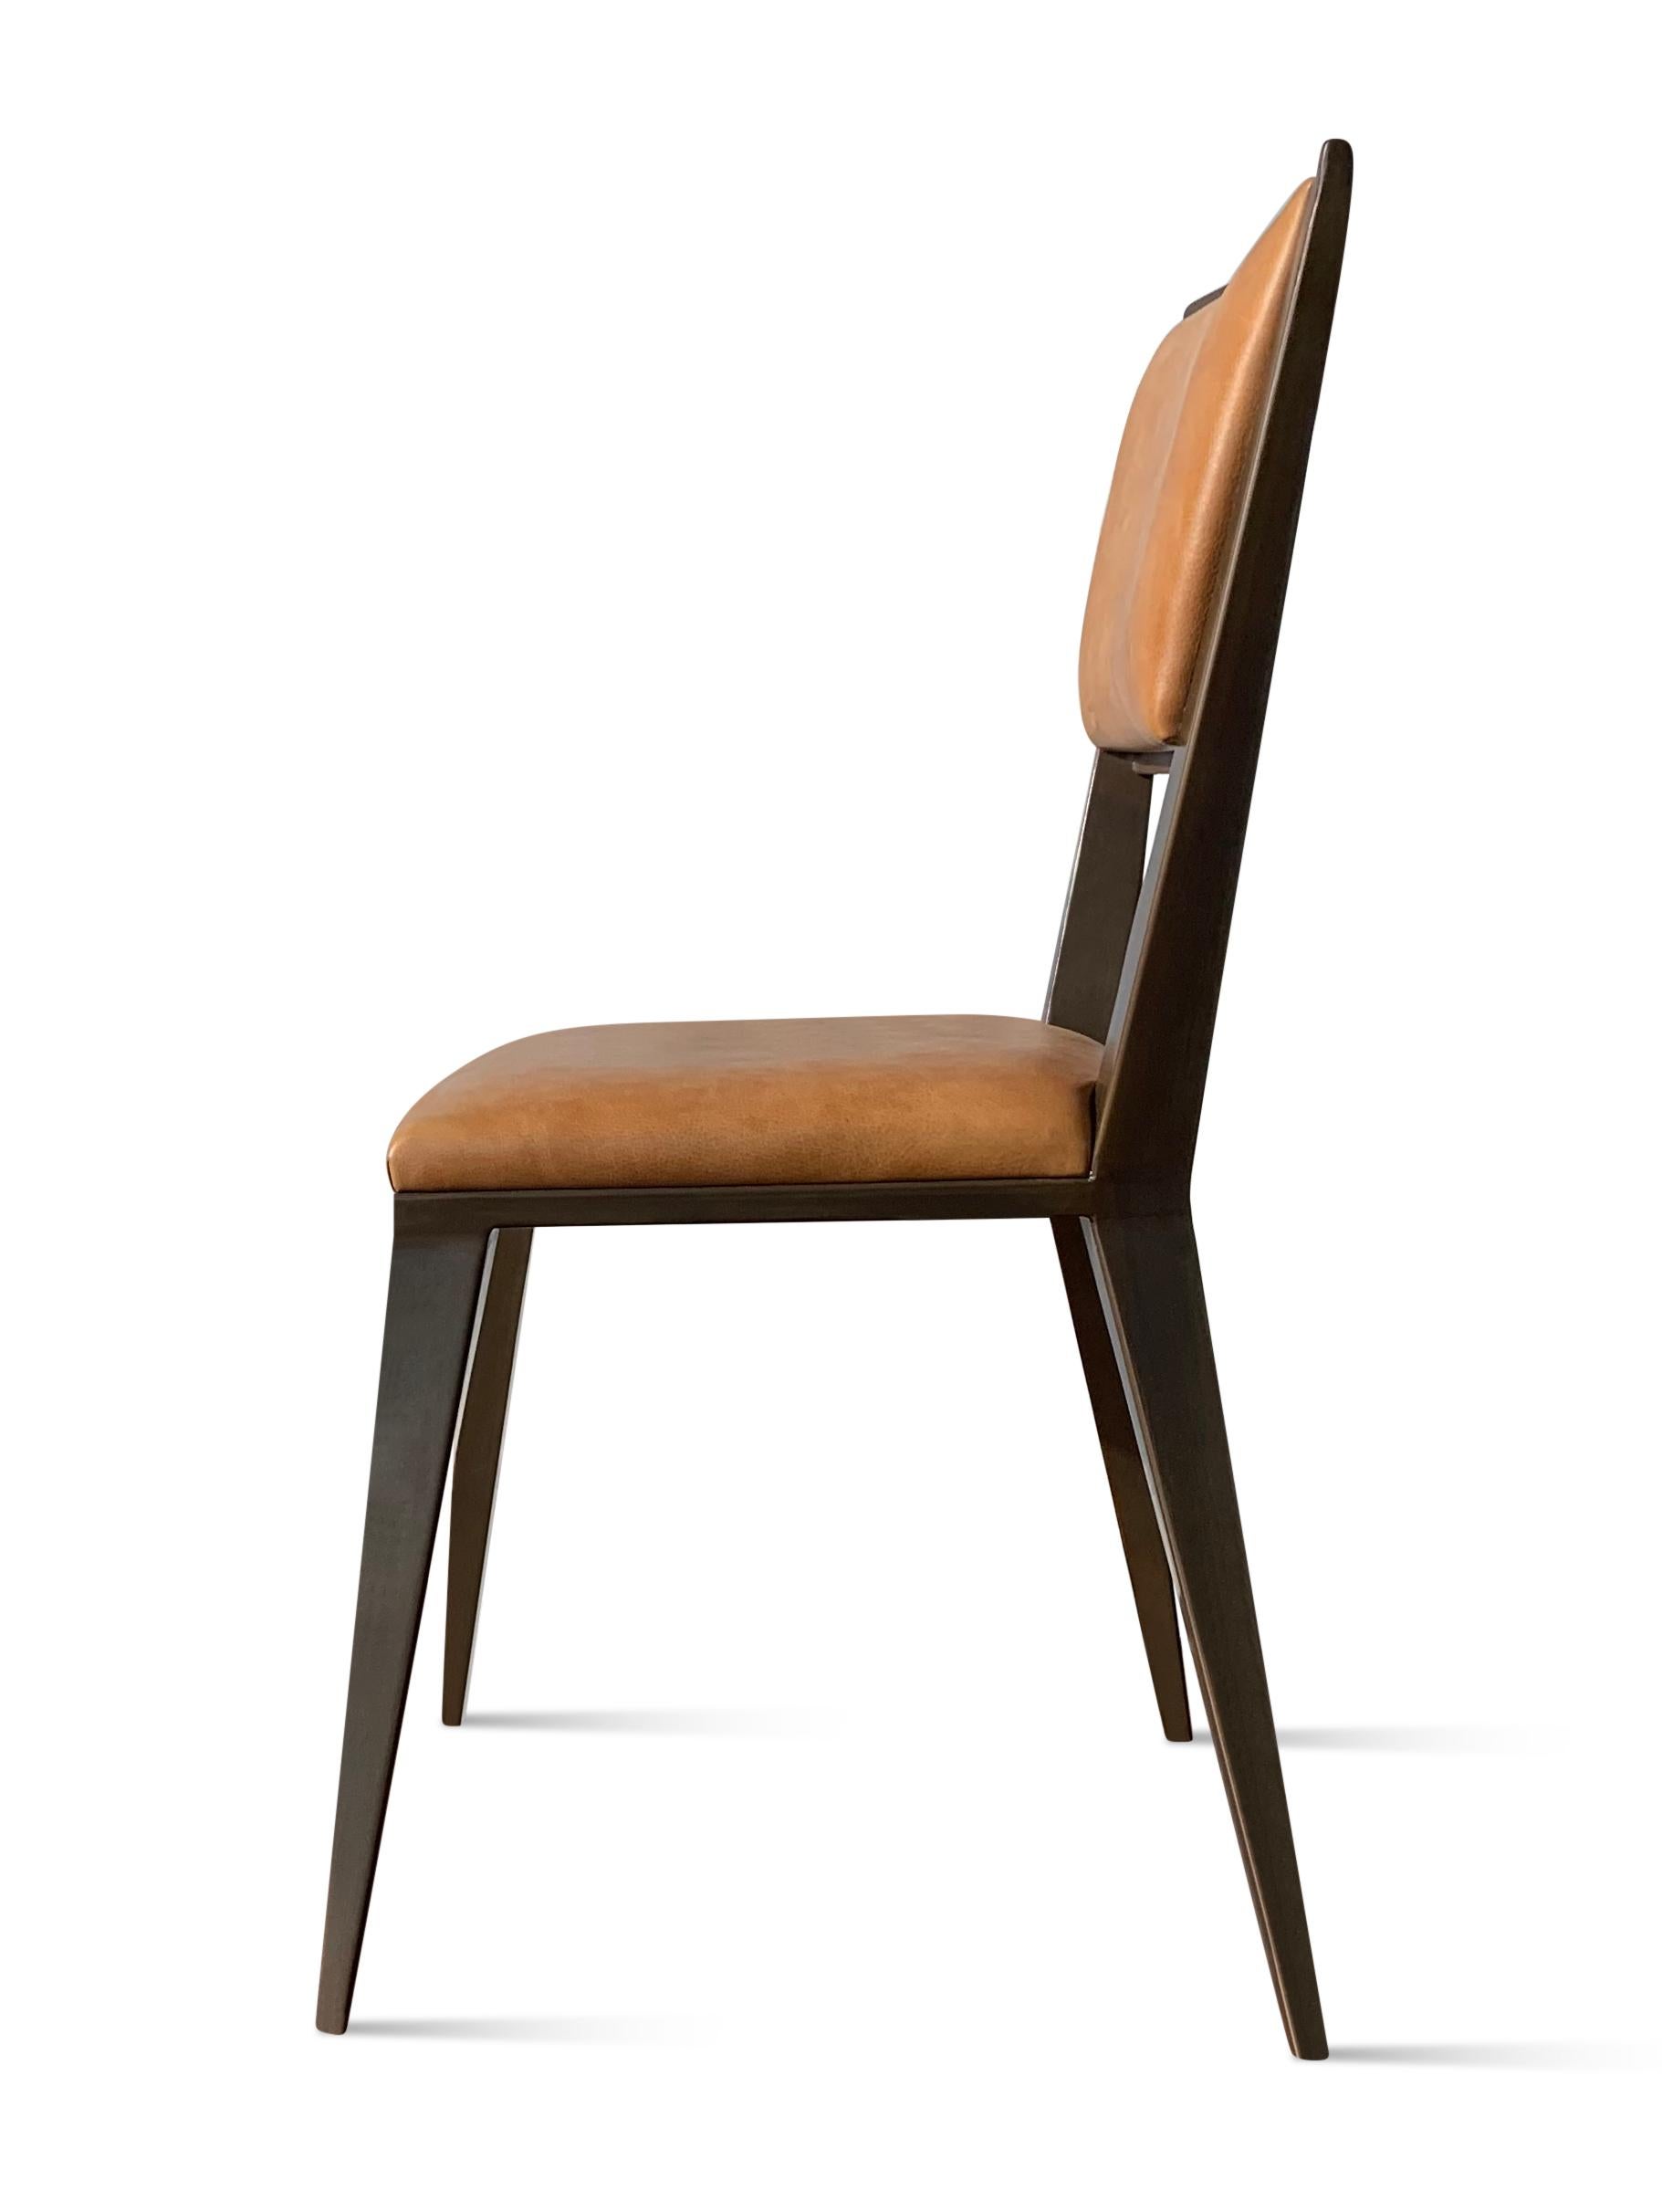 The Rodelio Chair by Costantini features a virtually indestructible yet light metal frame with removable seat and back for easy reupholstery as needed. One of Costantini's earliest designs, dating back to 2004, this piece has recently been reissued